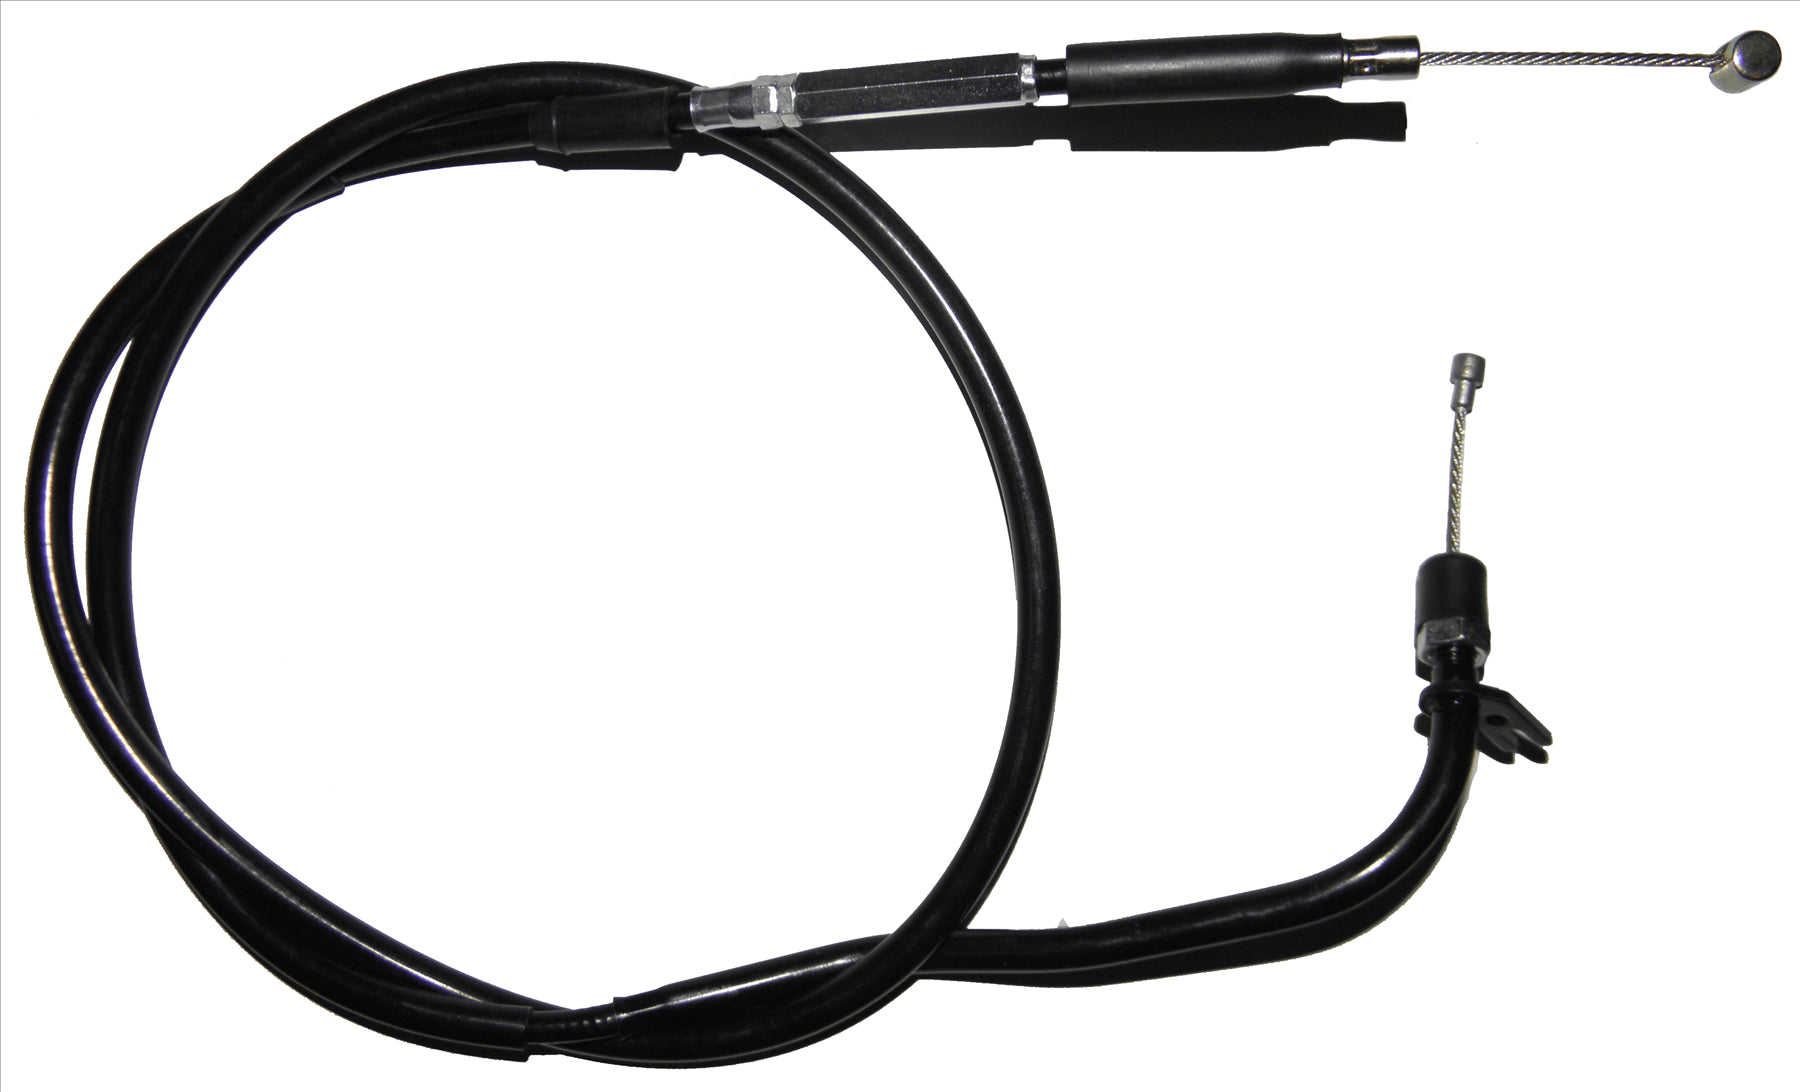 Apico Black Clutch Cable For Honda CRF 250RX 2019